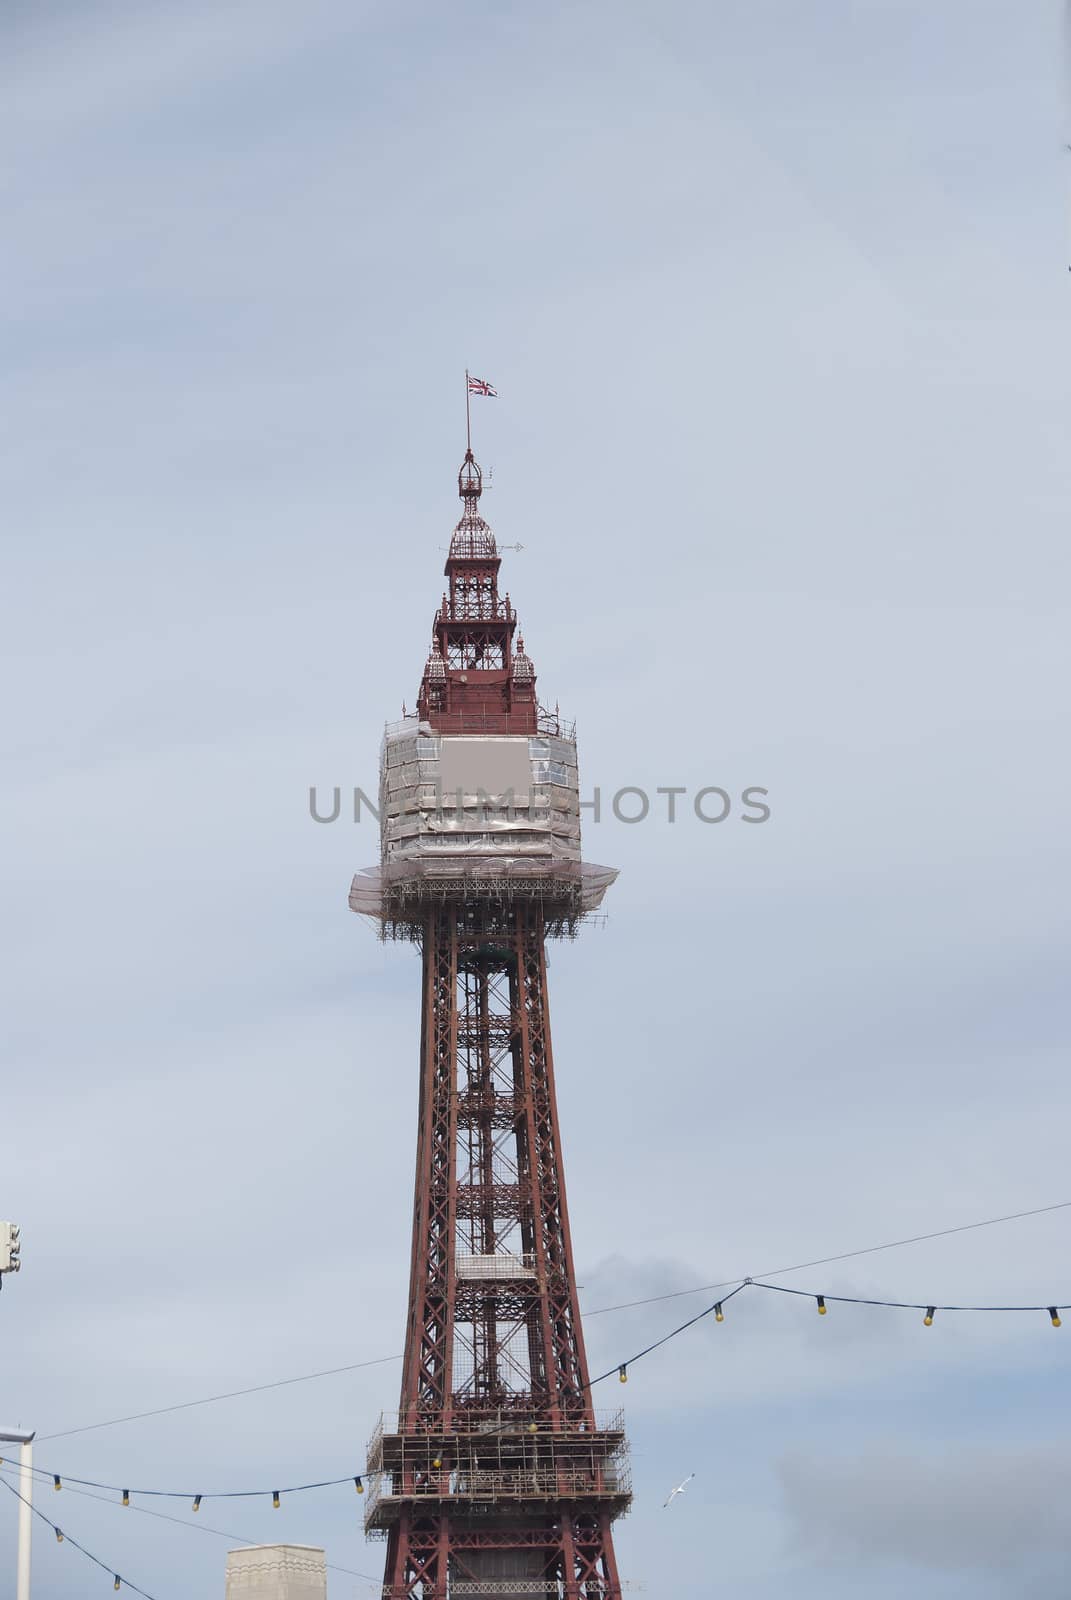 Blackpool Tower5 by d40xboy